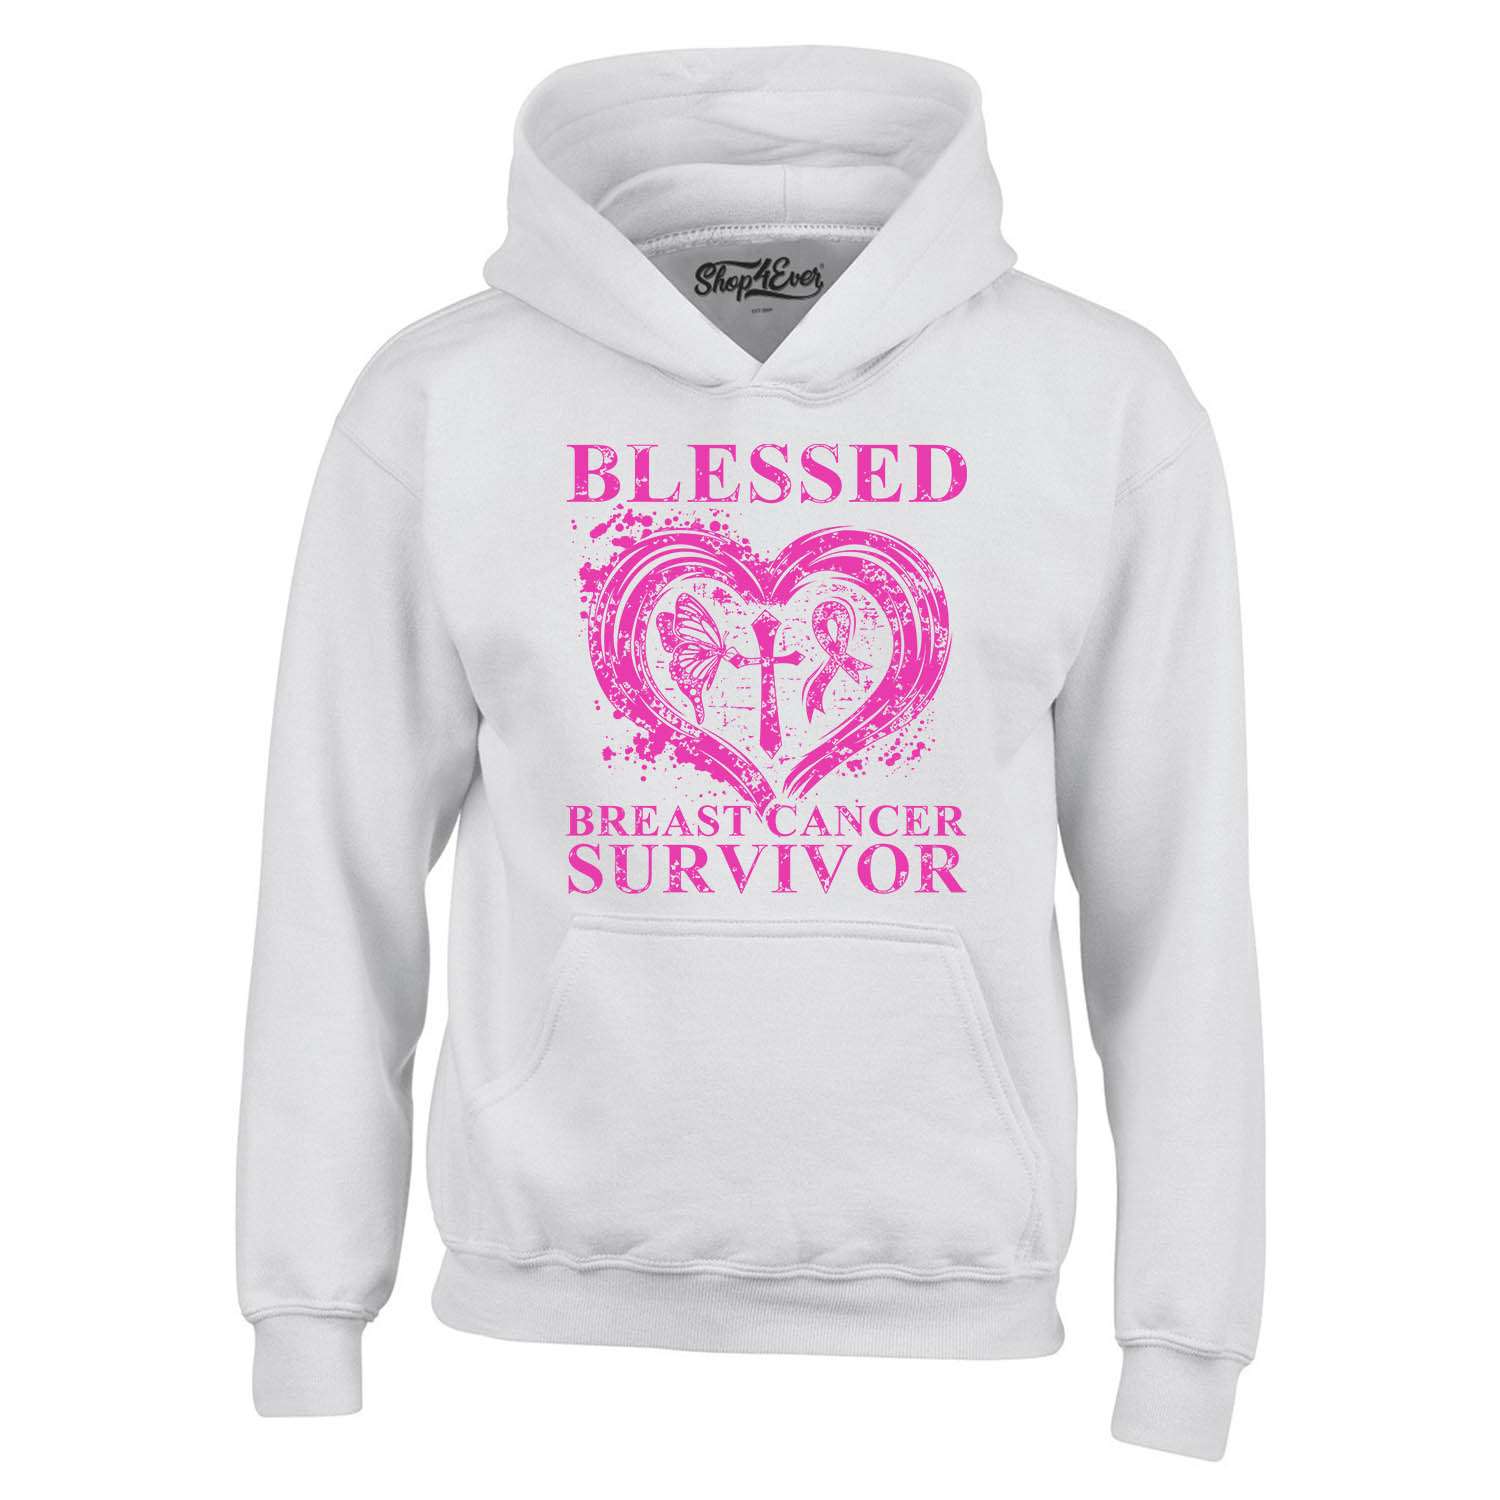 Tackle Breast Cancer Awareness PINK Ribbon Survivor supporter Hoodie S-6X 